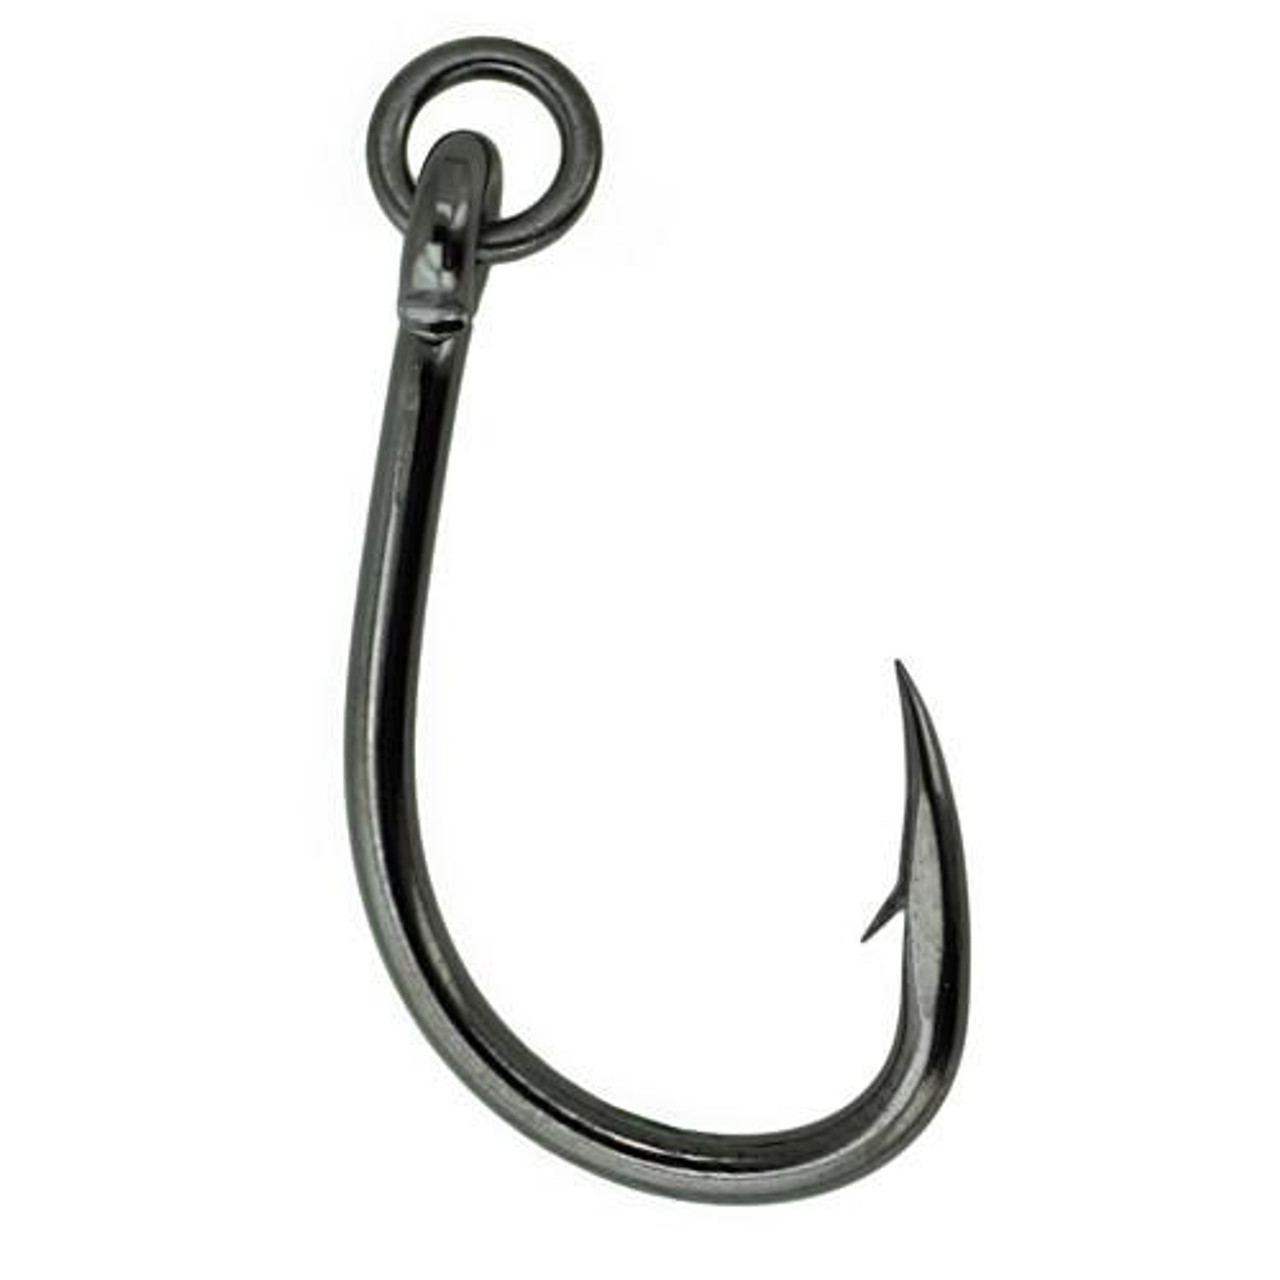 Gamakatsu Live Bait Hook with Solid Ring Size 2/0, NS Black, Per 5